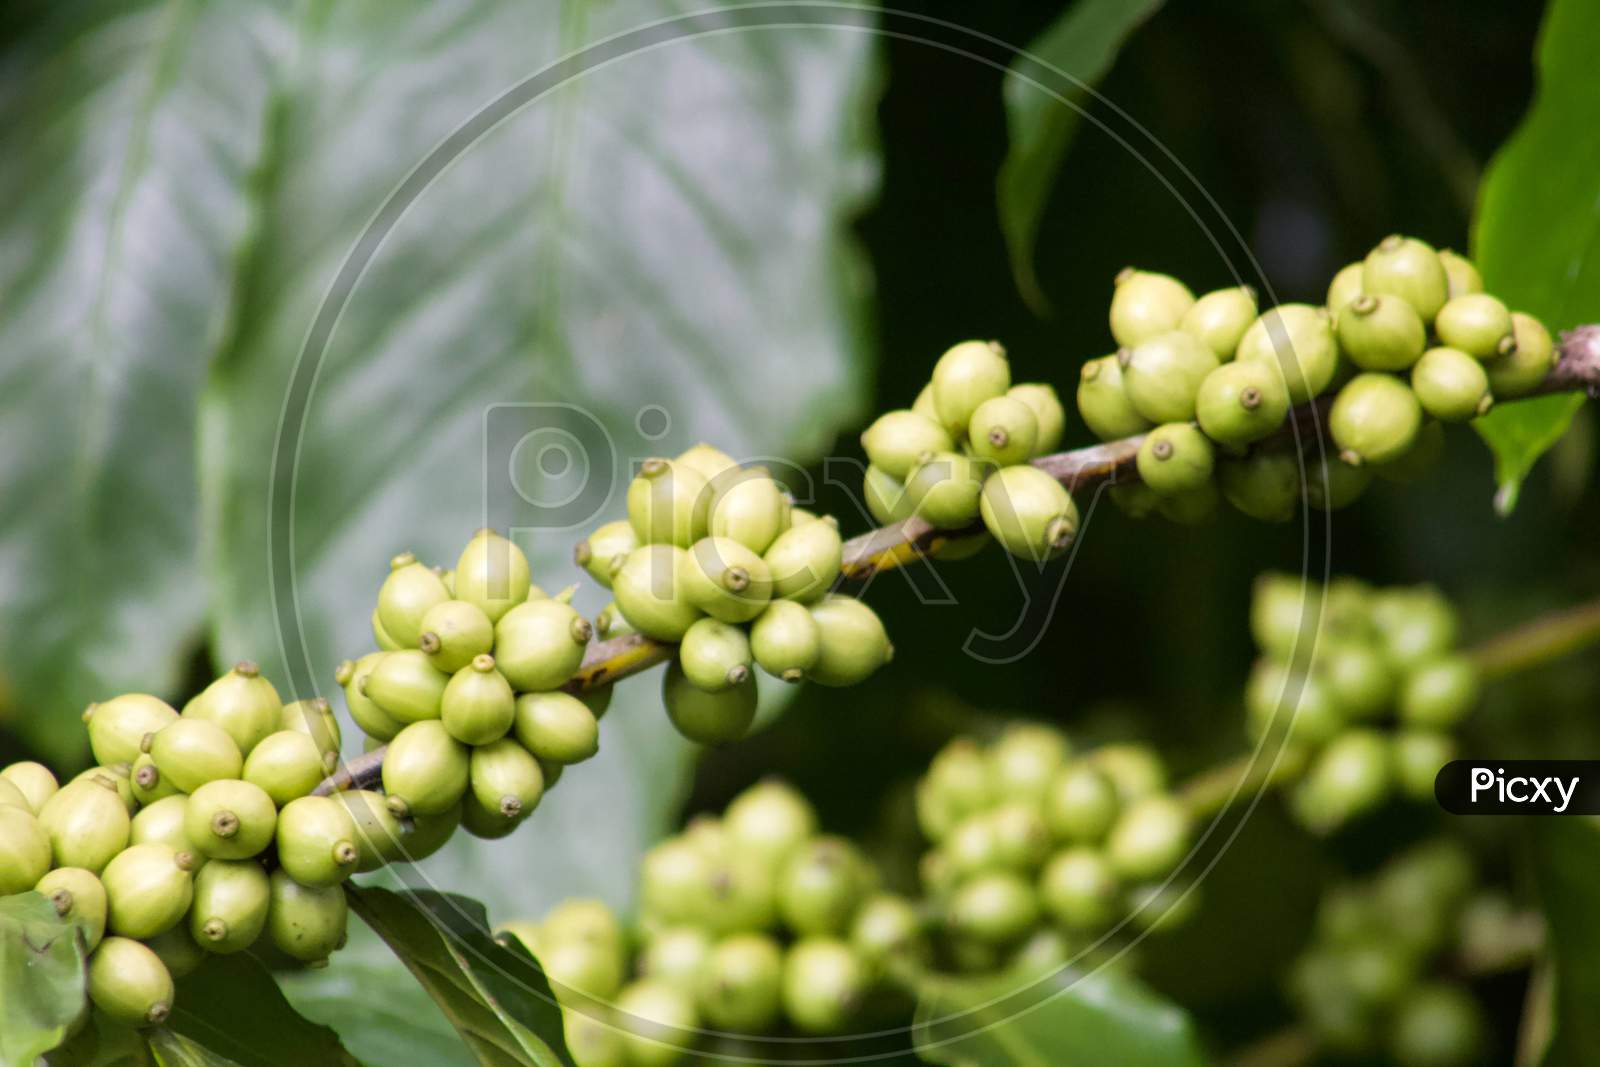 Coffee Beans in the estates.